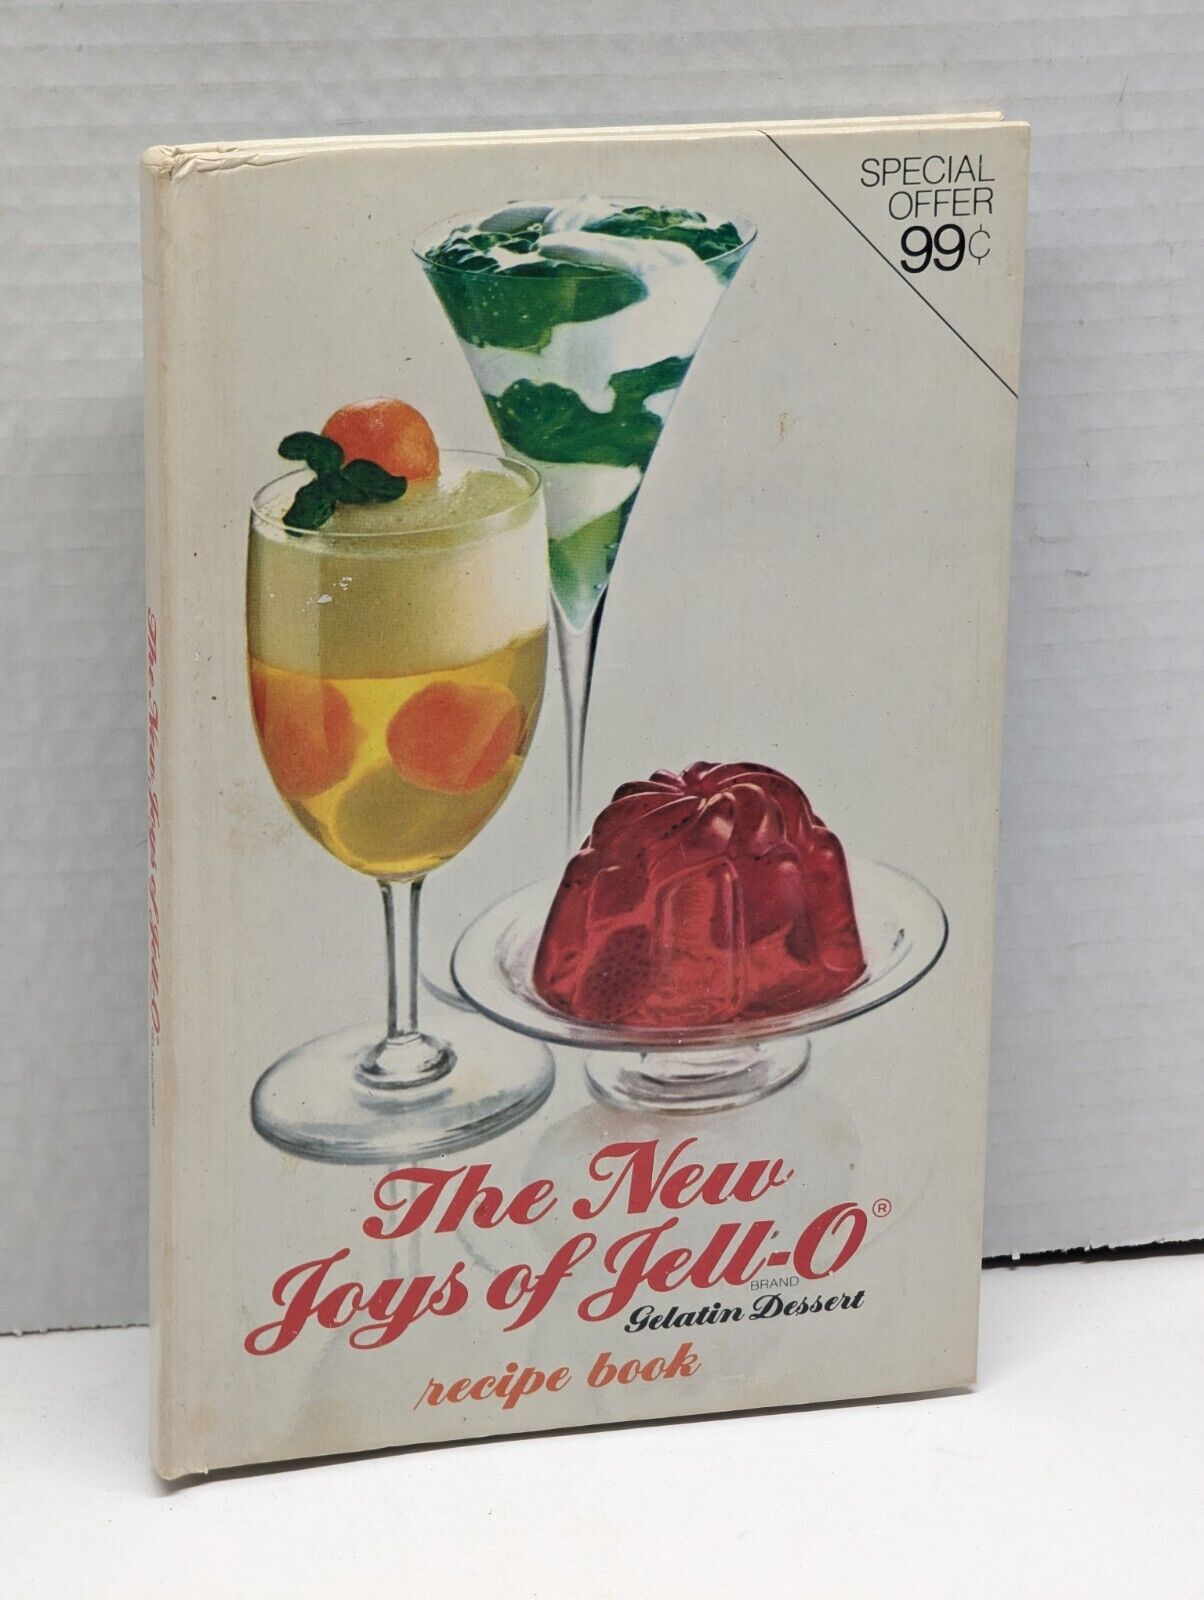 The New Joys Of Jell-o Recipe Book. 1974 Vintage Retro Cookbook 2nd EDITION